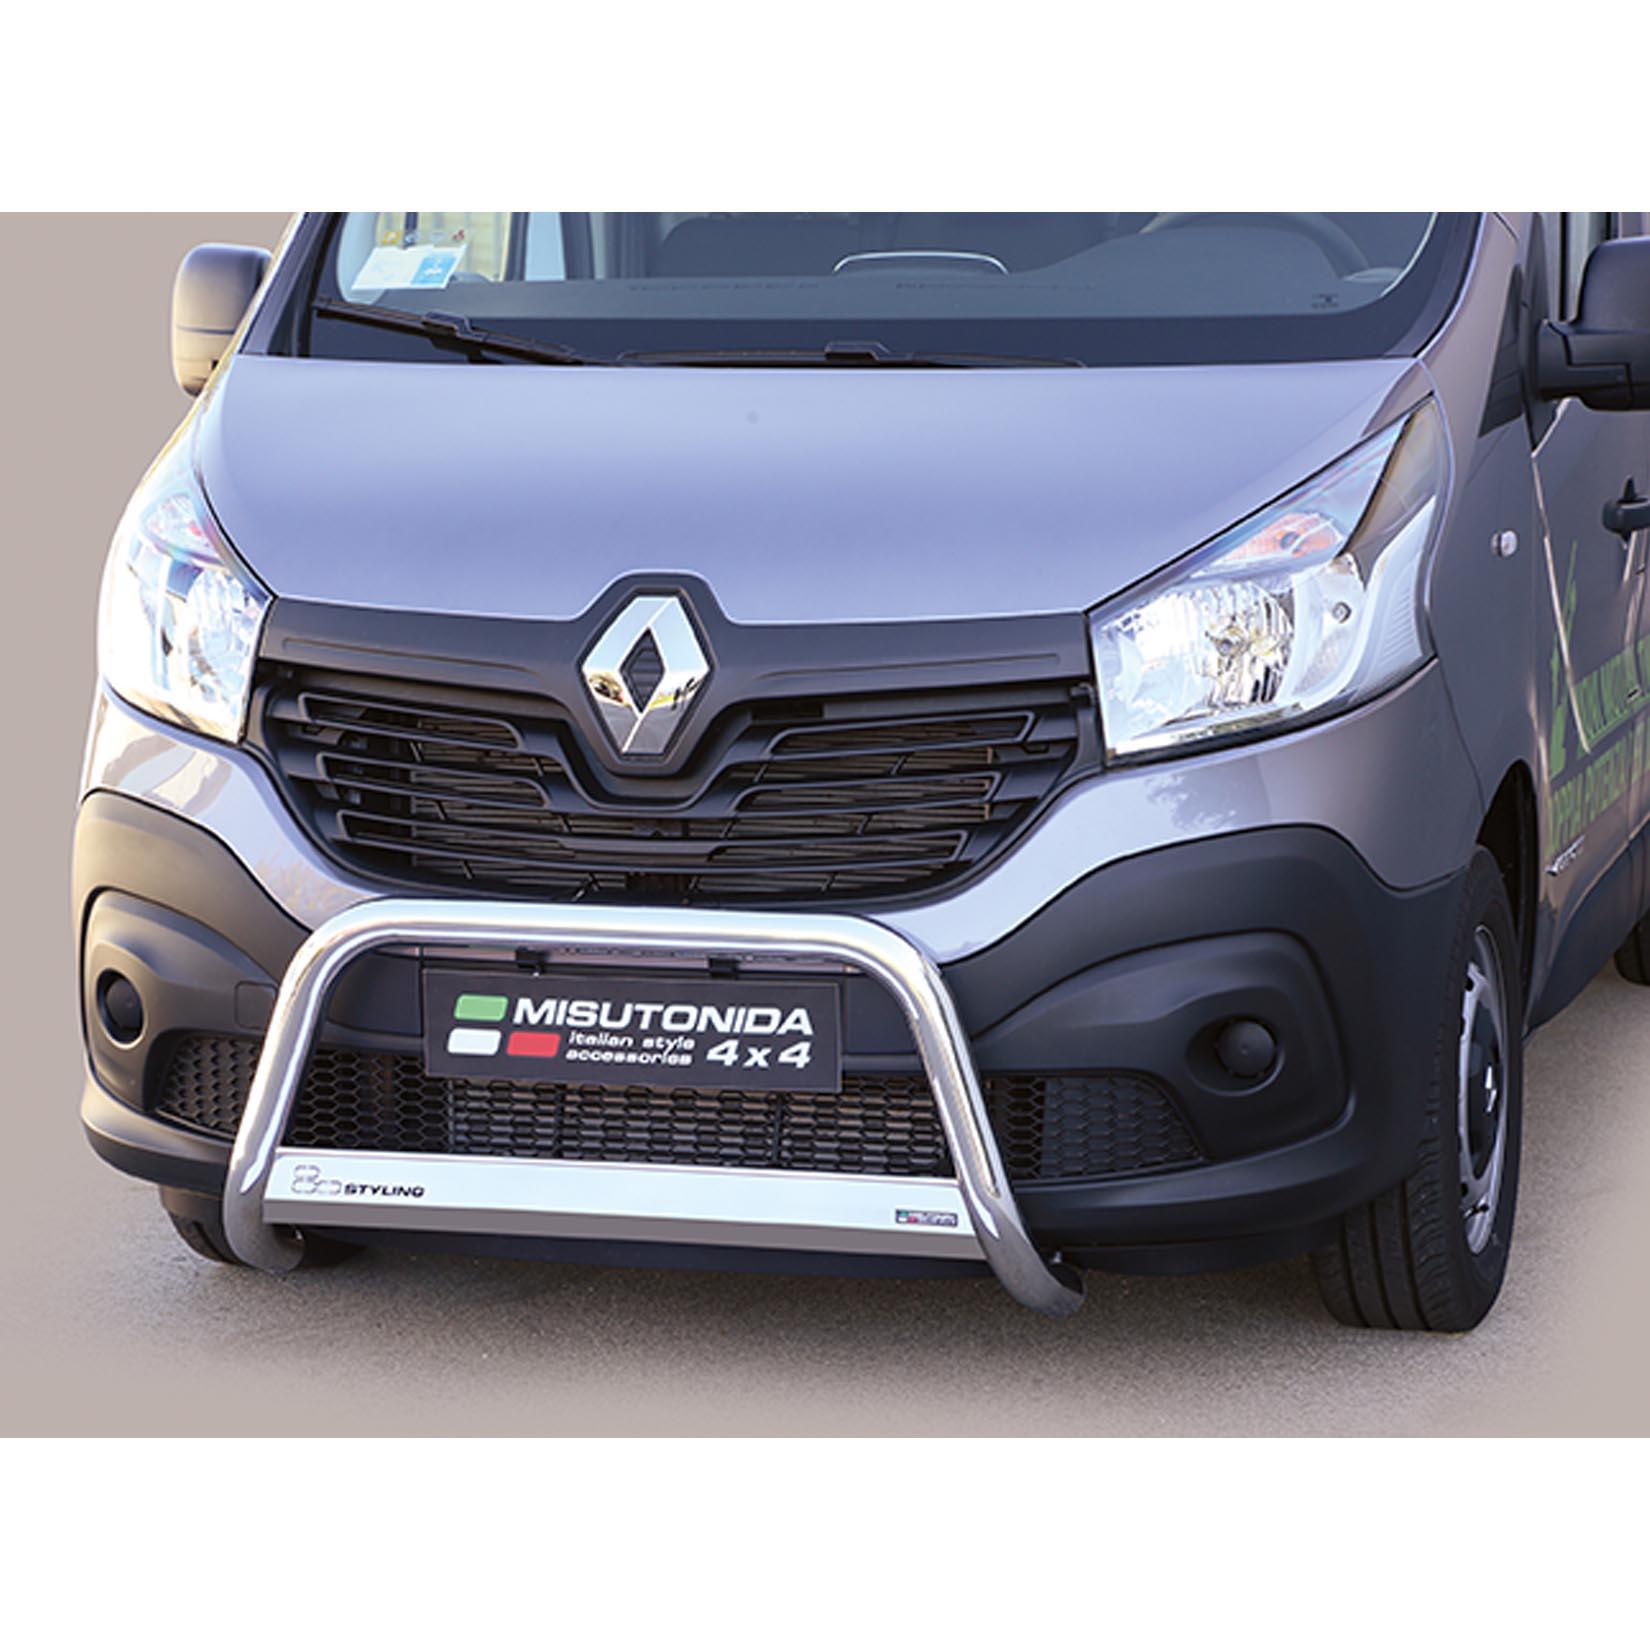 RENAULT TRAFIC 2014 ON MISUTONIDA EU APPROVED FRONT A-BAR - 63MM - STAINLESS FINISH - Storm Xccessories2